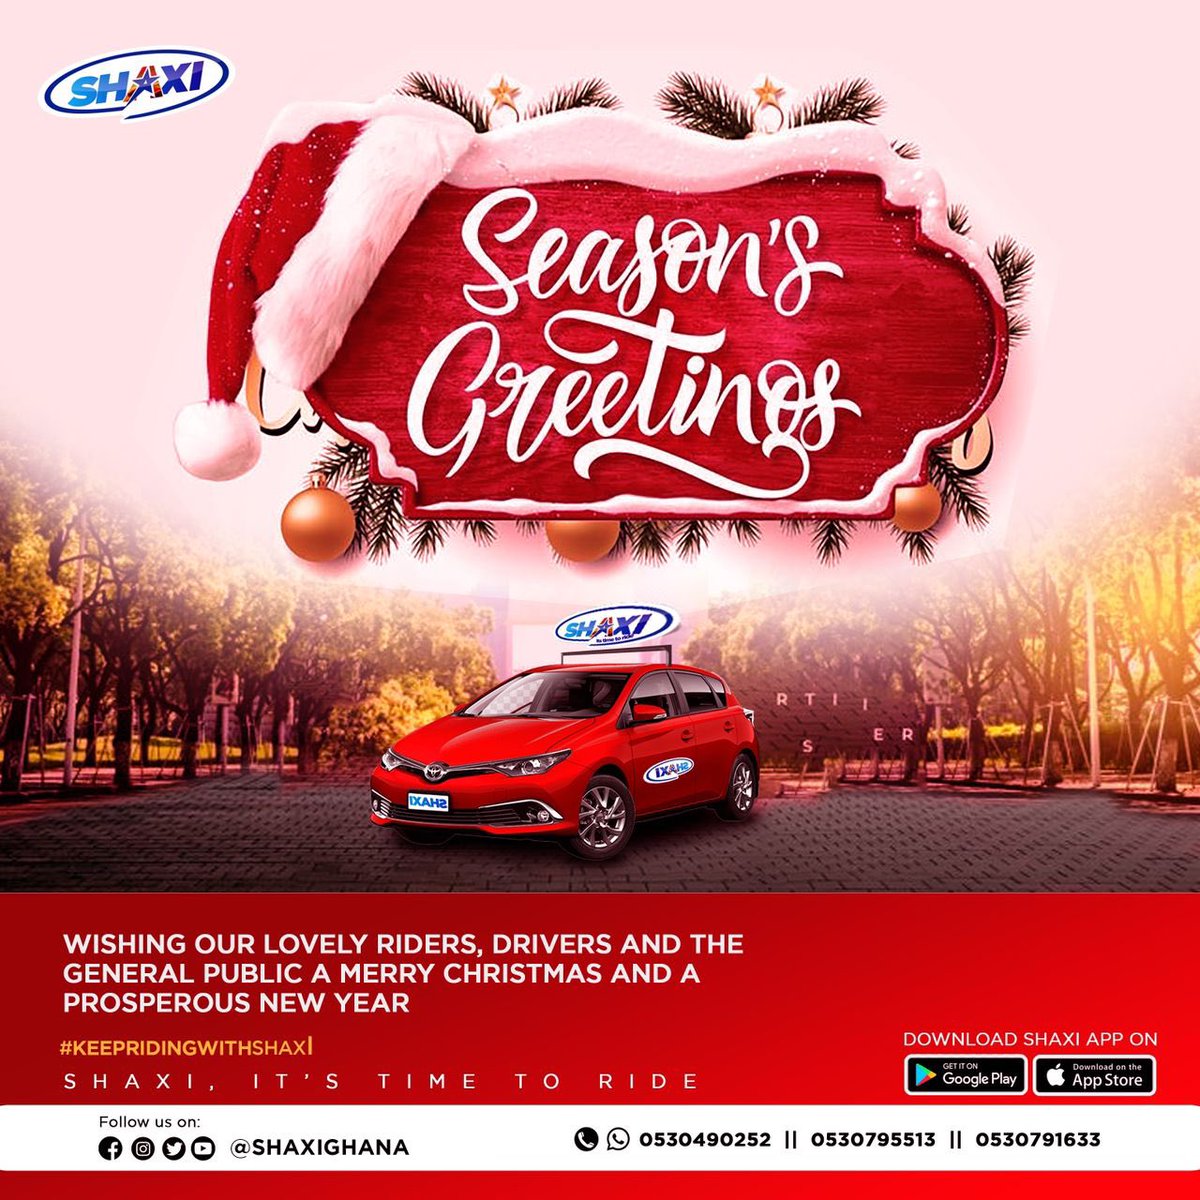 Wishing a Merry Christmas and a Prosperous New Year to our wonderful riders, dedicated drivers, and the entire community! May the joy of the season fill your hearts and may the new year bring you success and happiness. #KeepRidingWithShaxi #shaxighana